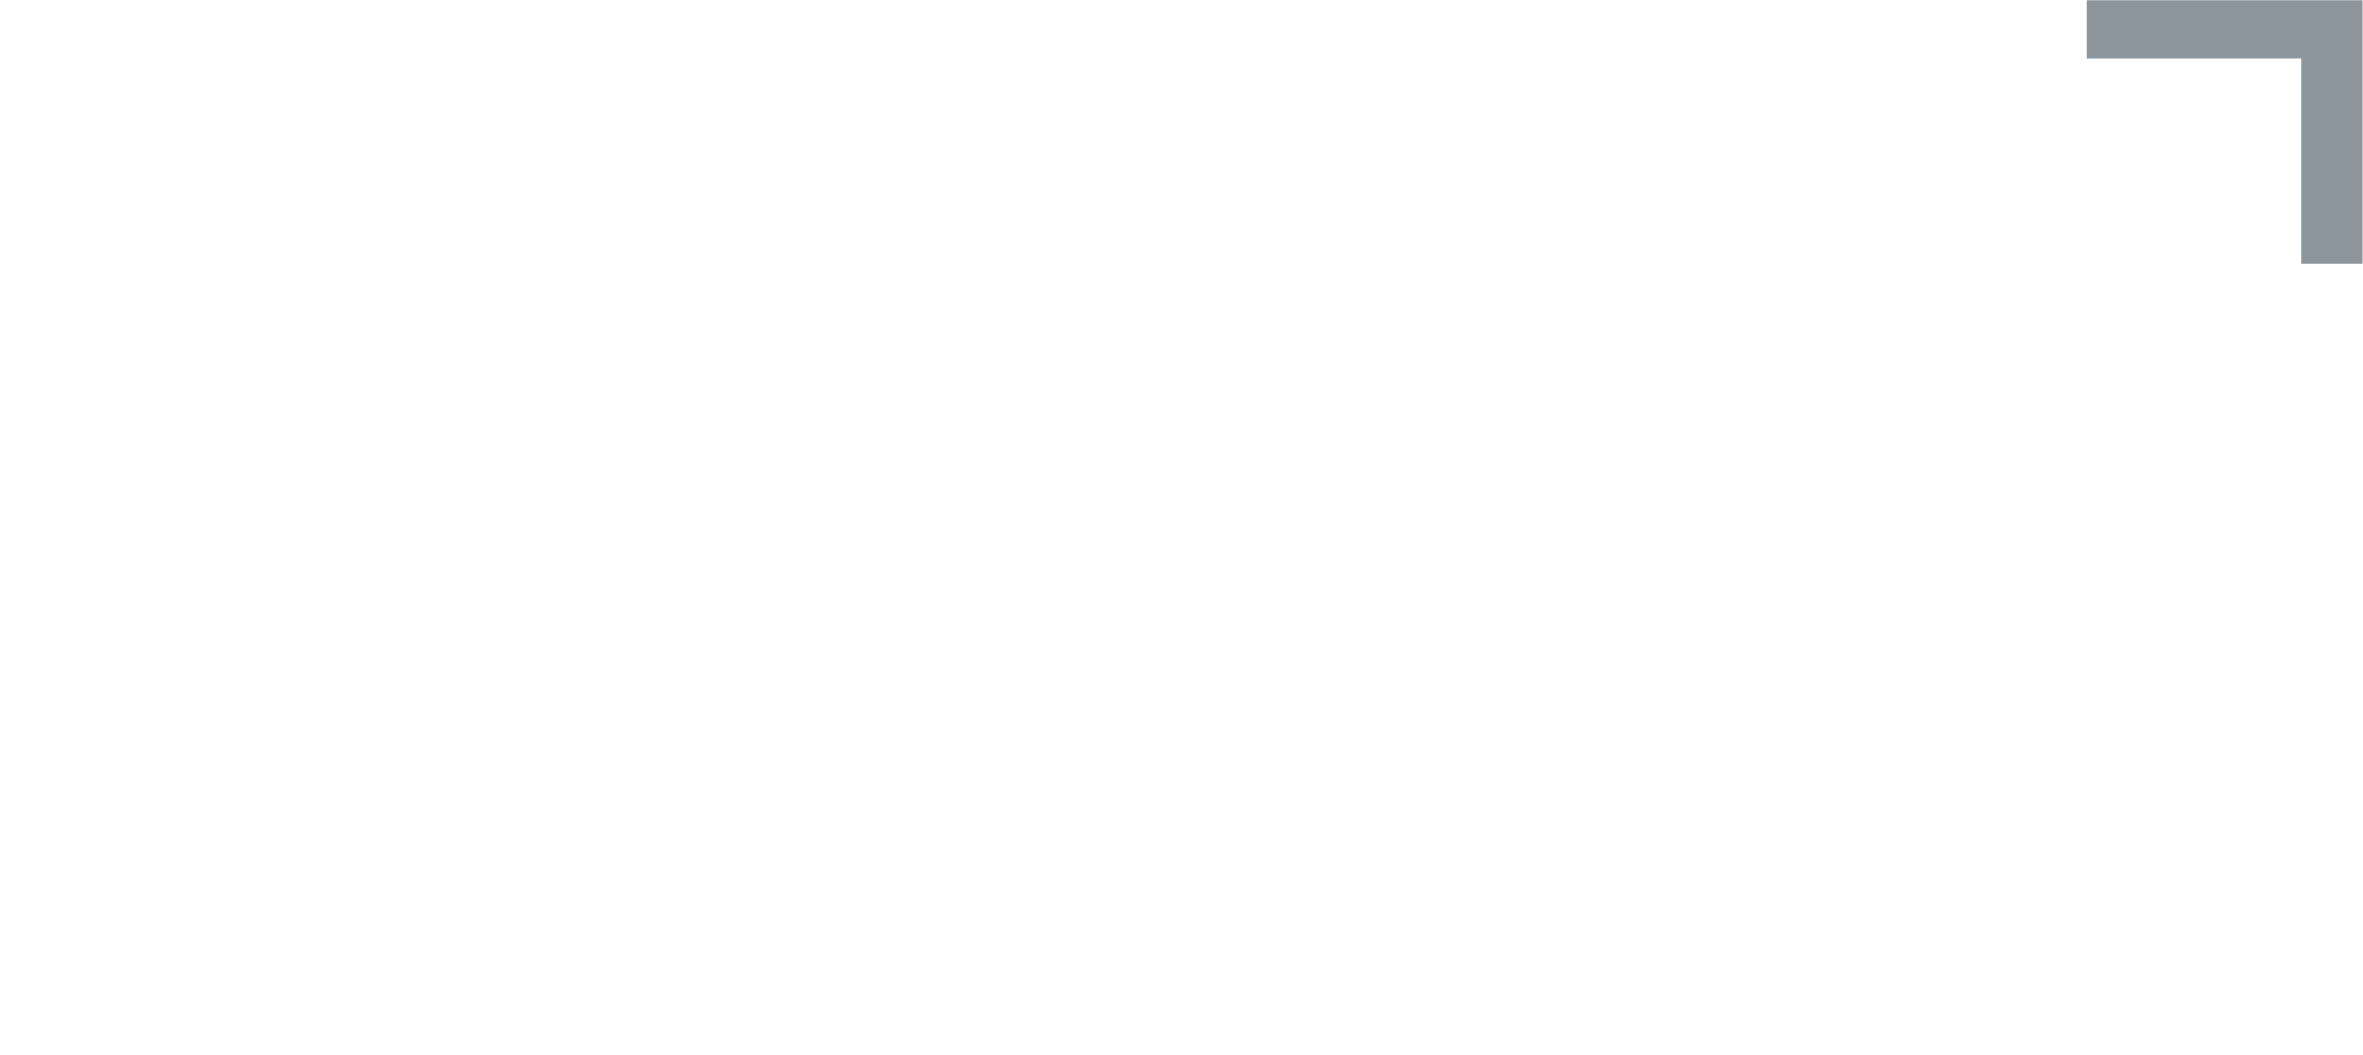 7yrds_consulting-logo-Inverted-one-color-cmyk